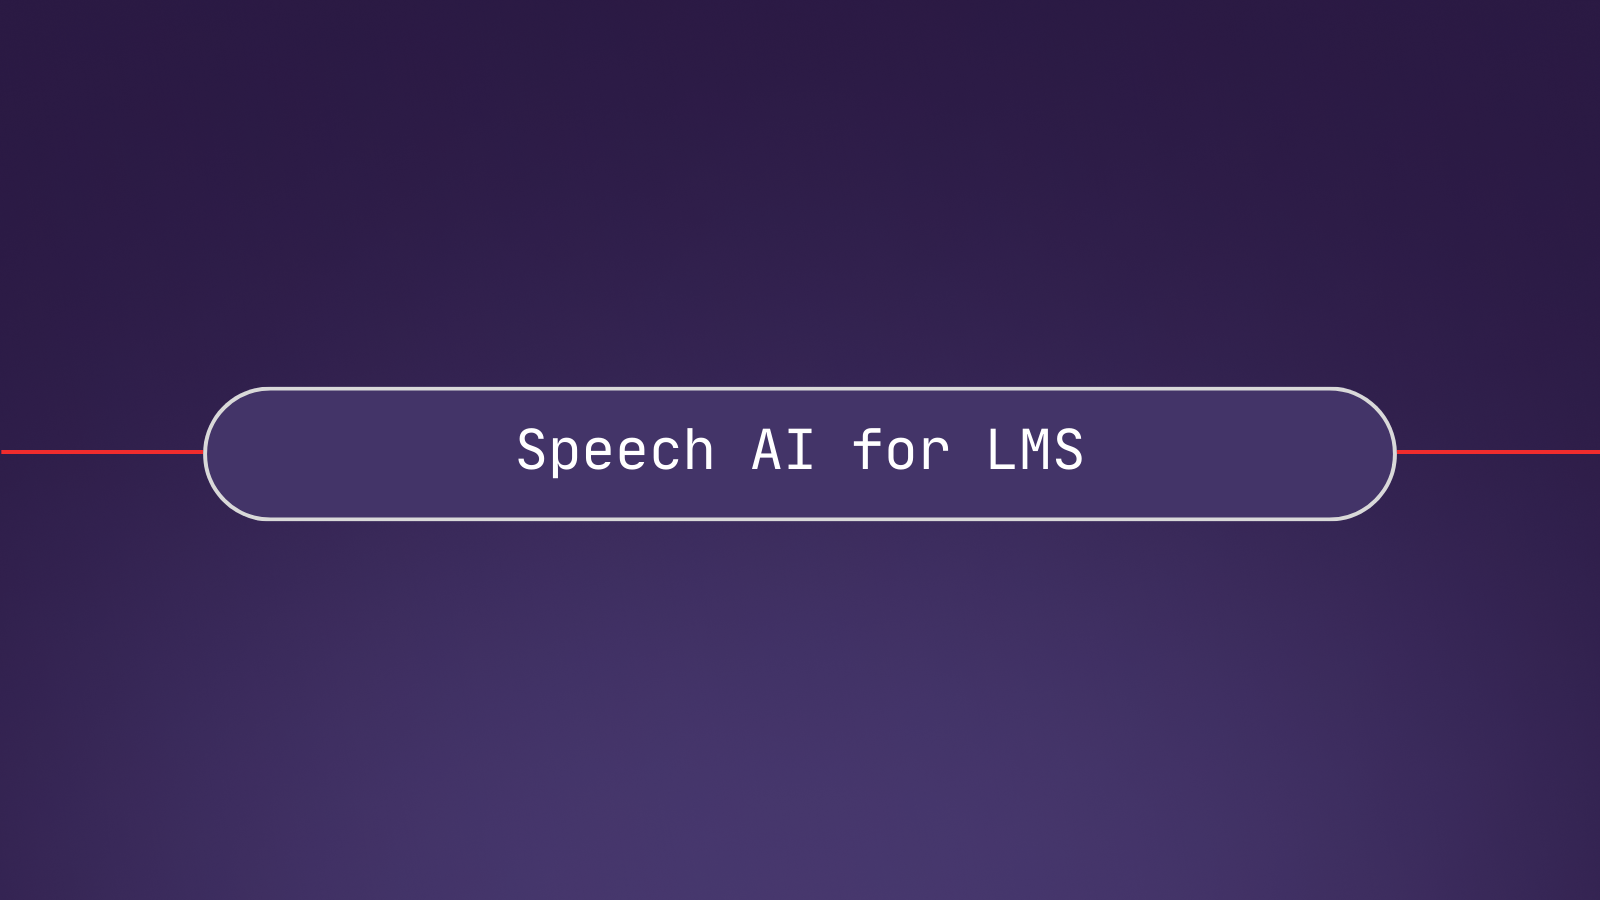 Speech AI use cases for Learning Management Systems